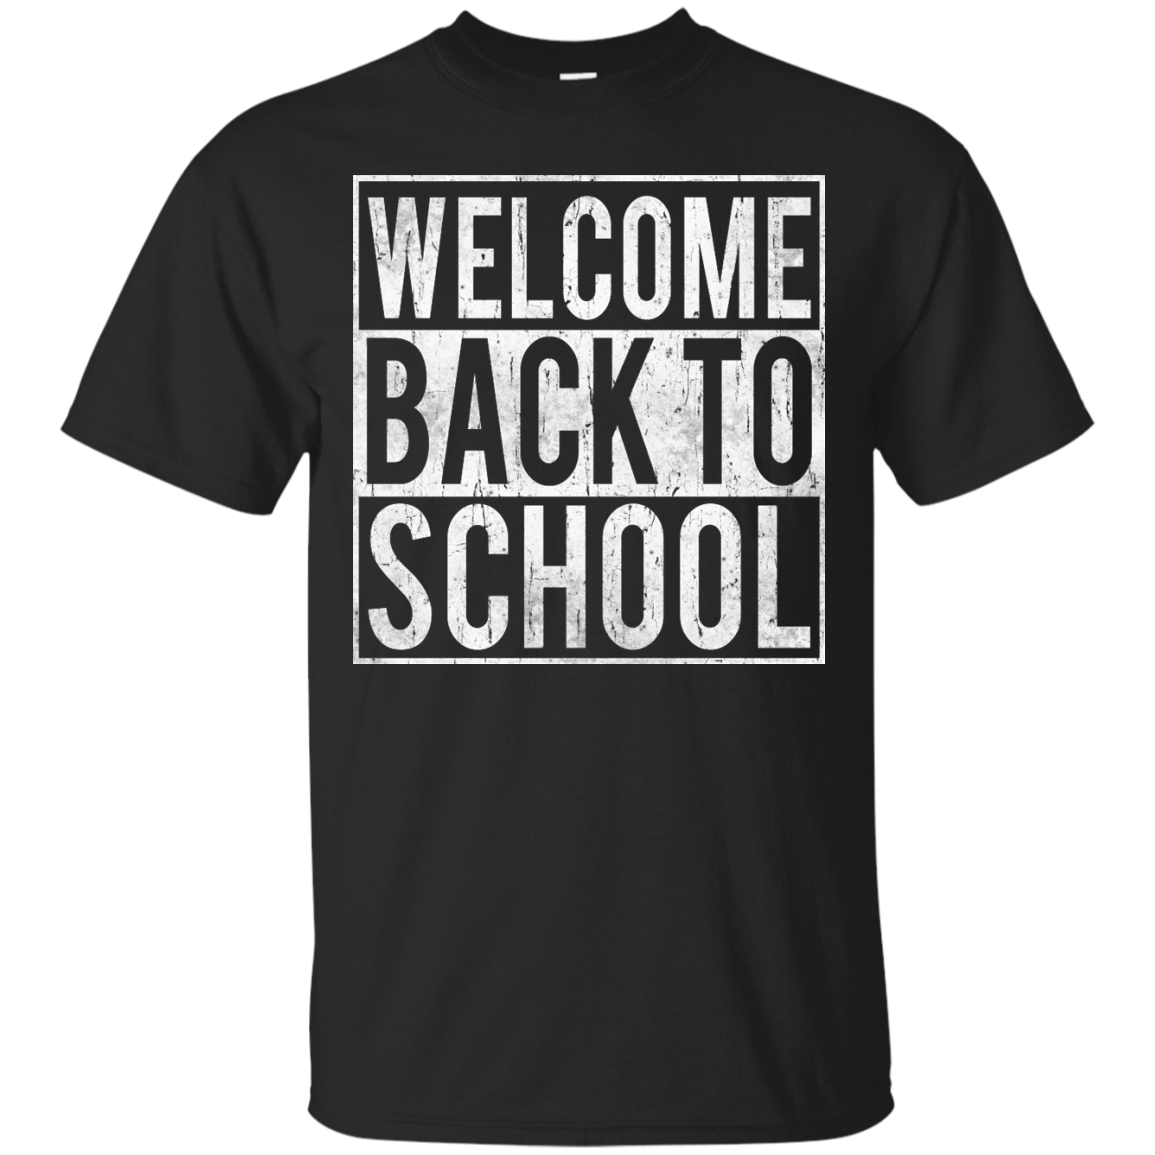 Welcome Back to School shirt, tank top